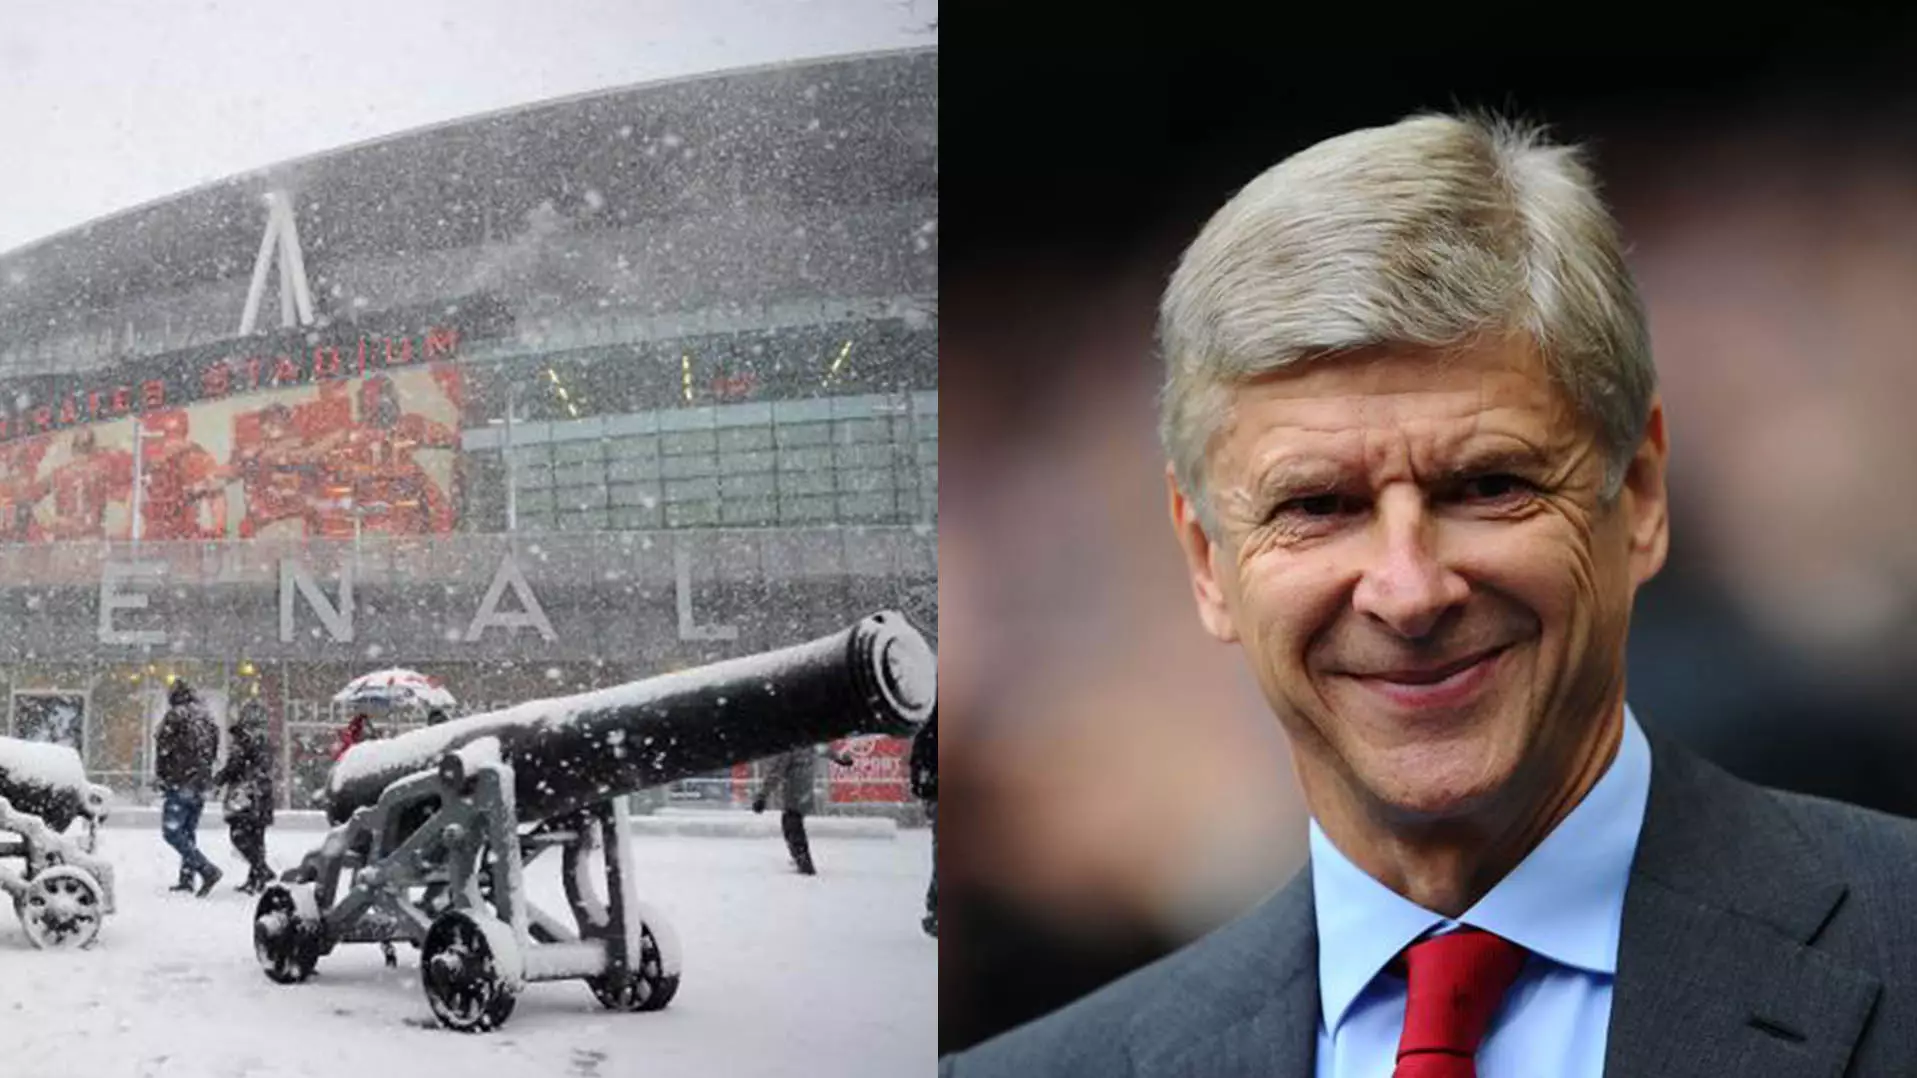 ​Arsenal v Man City 3/1 To Be Cancelled Due To Snow